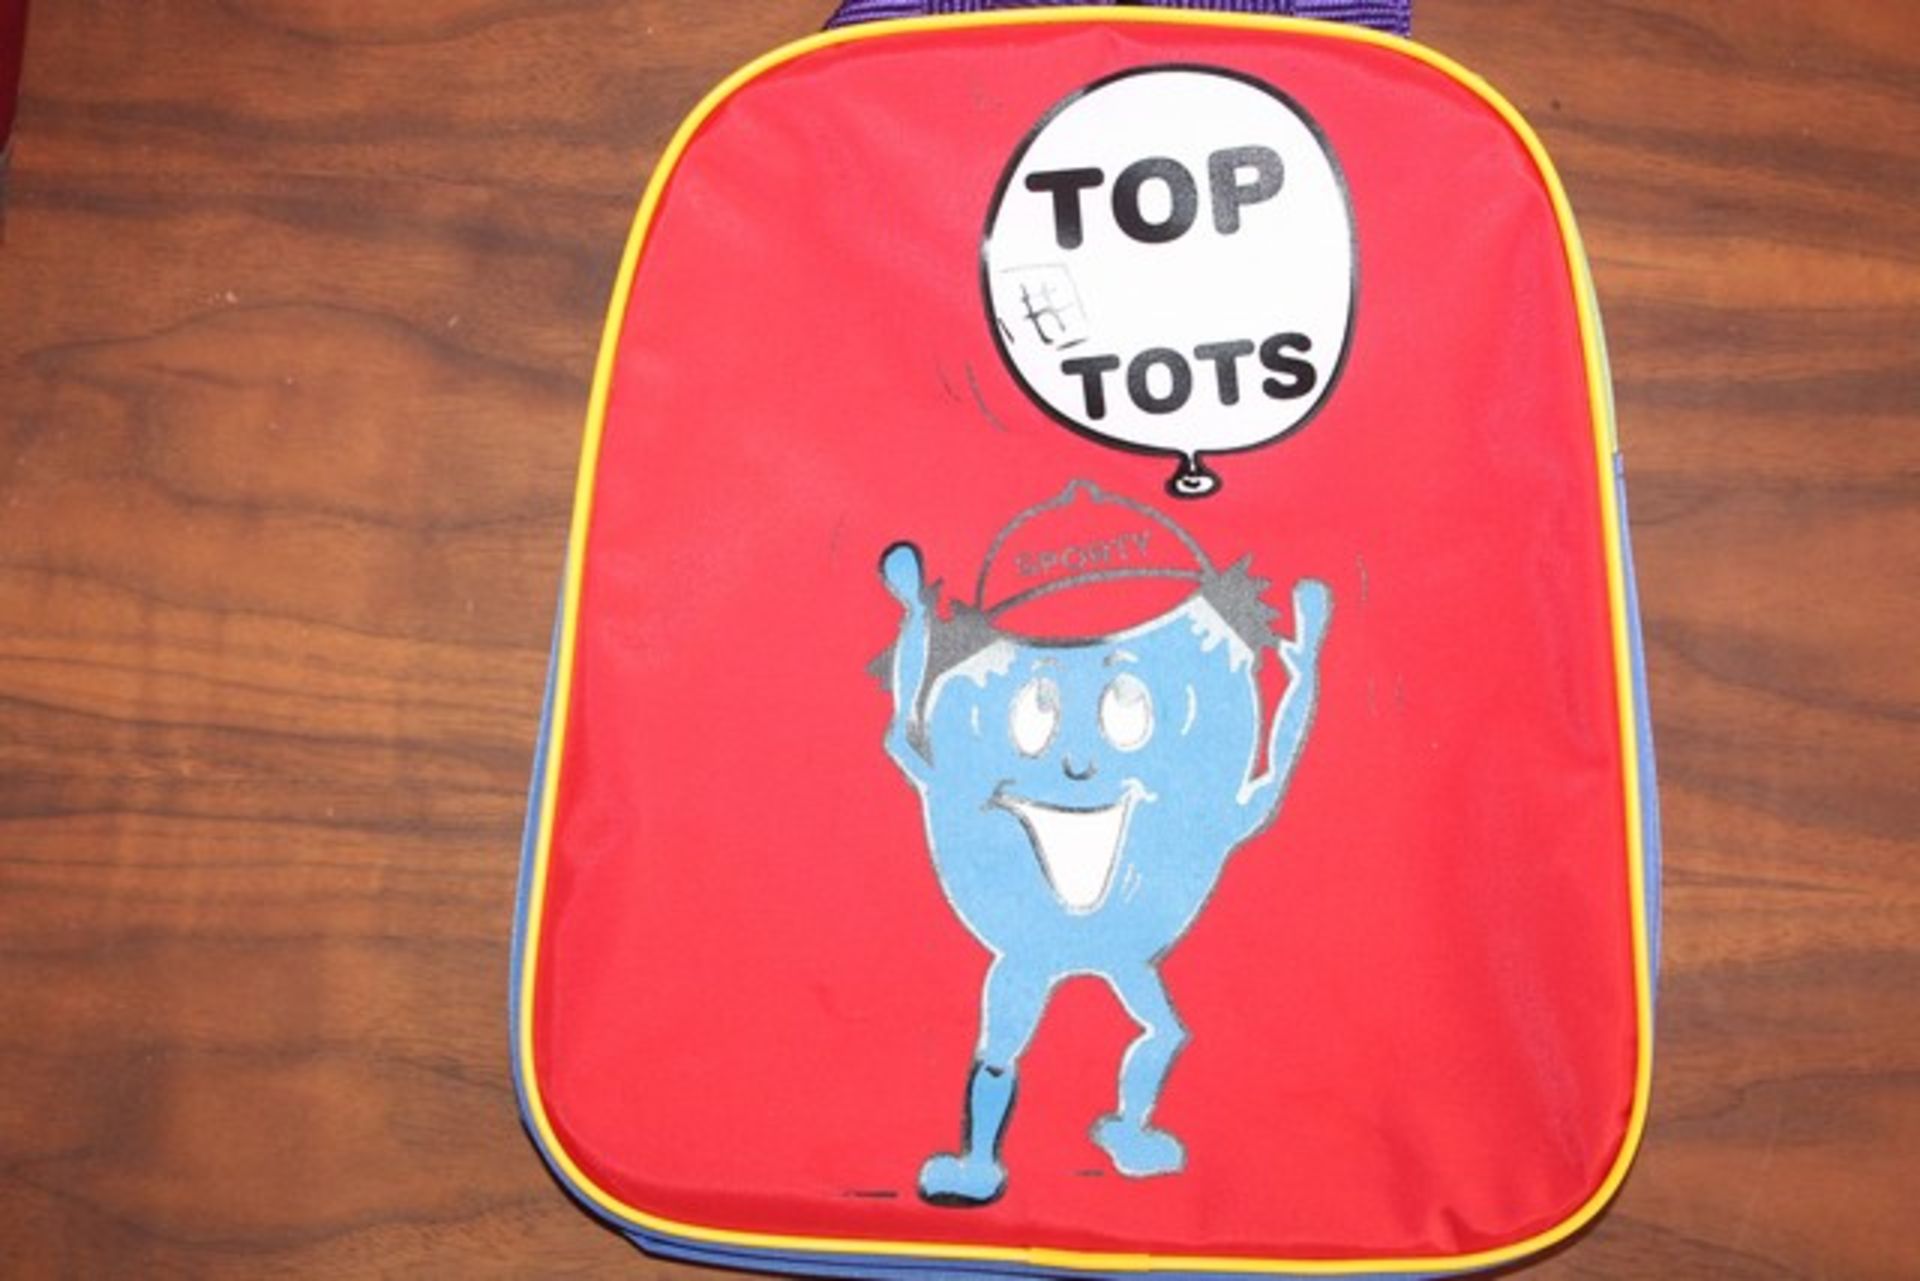 5 x TOP TOTS SPORTS BAGS   *Please note that the bid price is multiplied by the number of items in